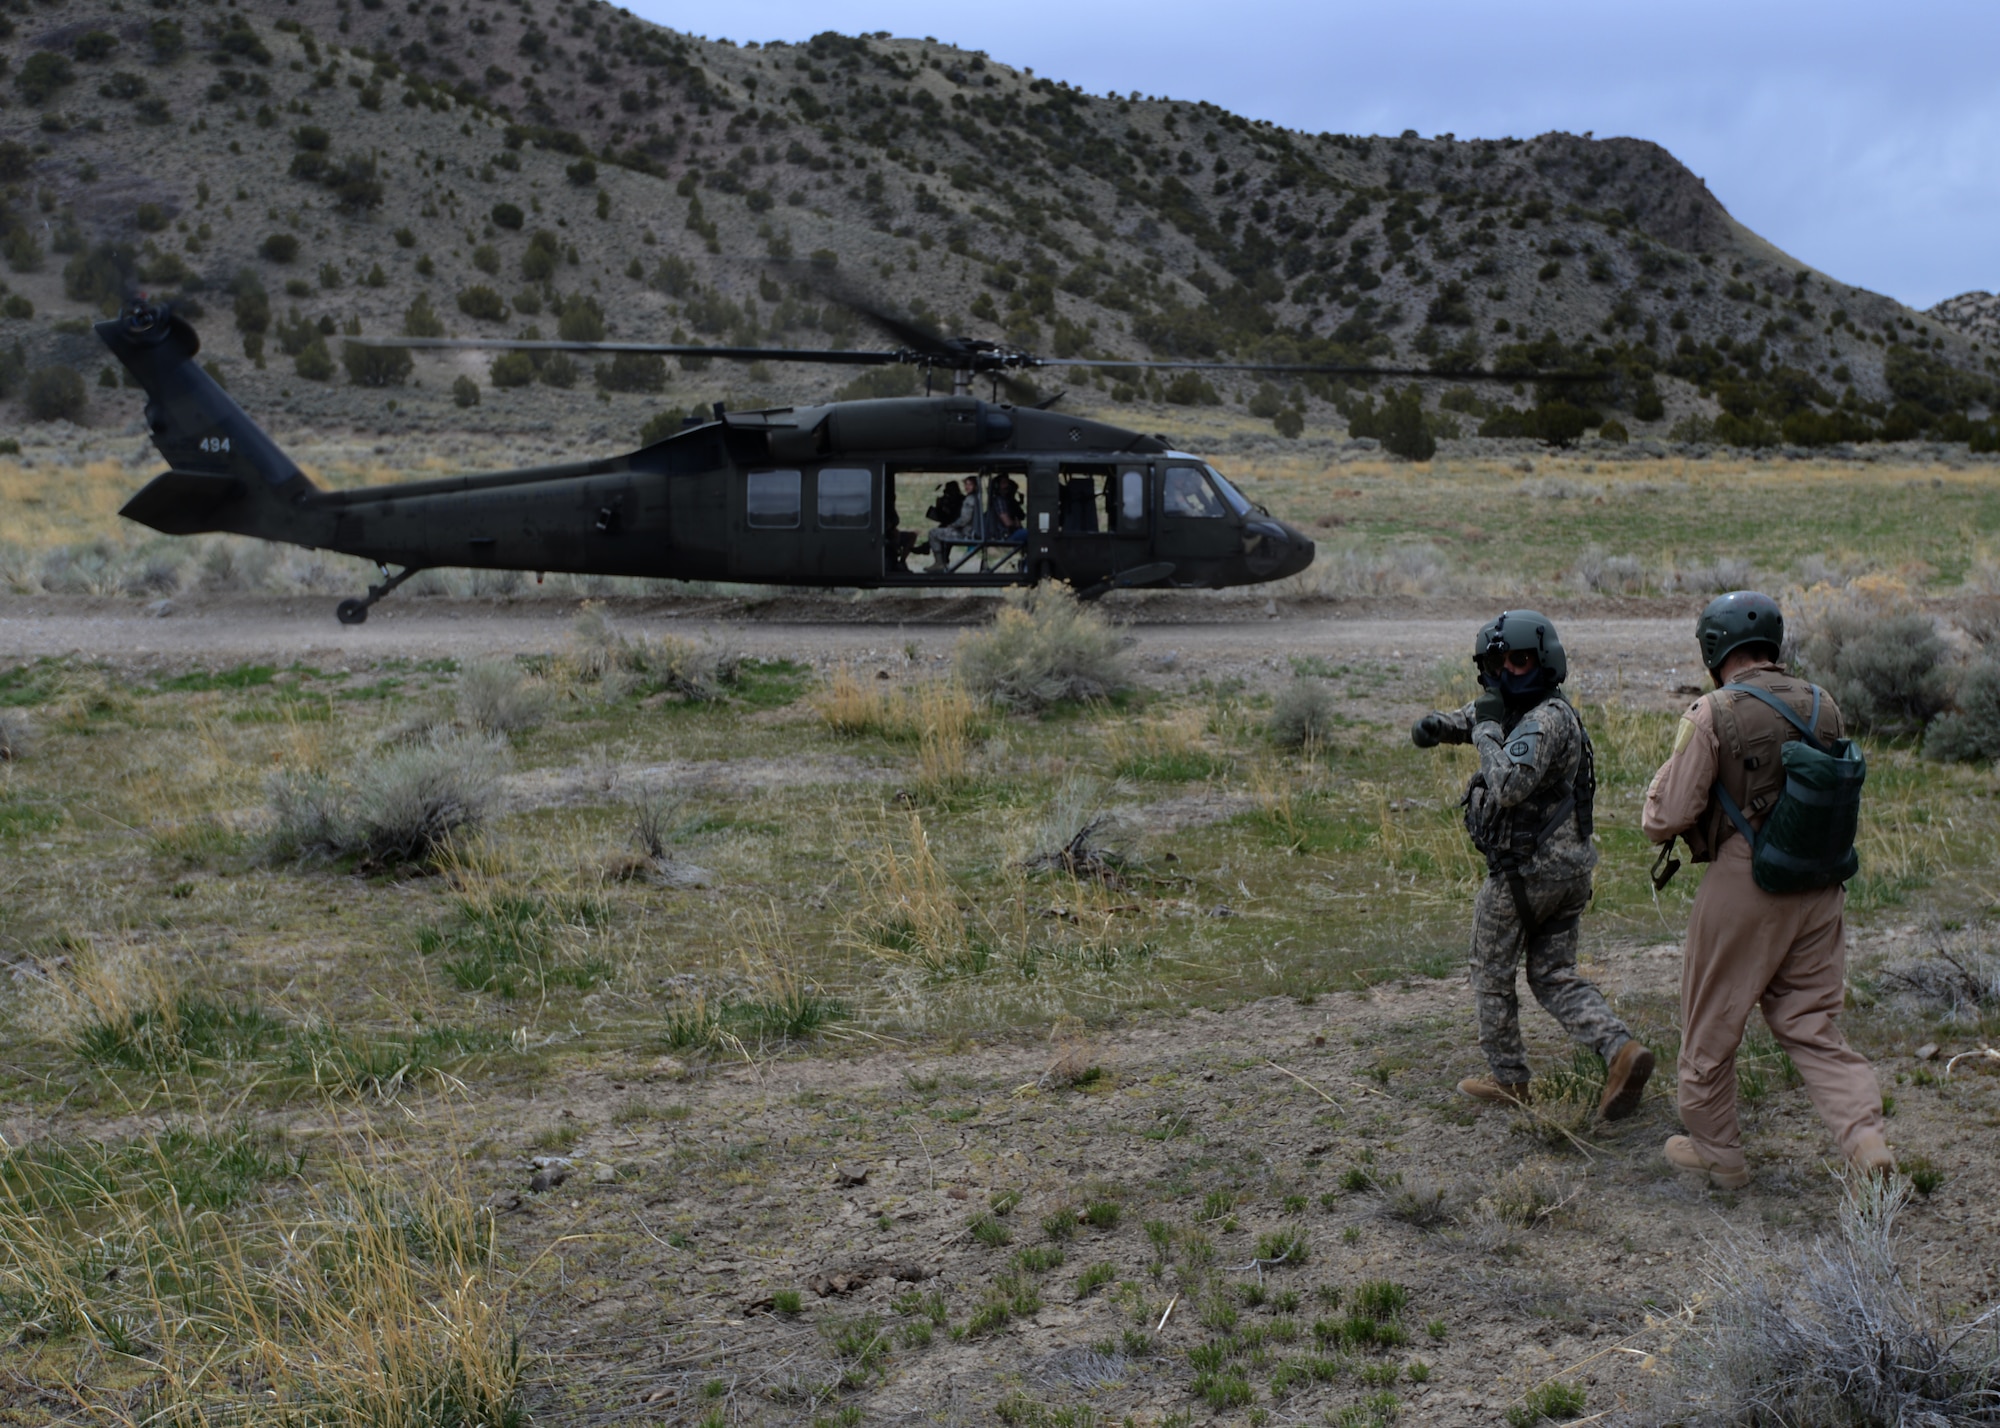 F-16 pilot Lt. Col. Thomas Wolfe (right) is led to a UH-60 Black Hawk by an air crew member during the Lone Survivor exercise near the Utah Test and Training Range April 12. (U.S. Air Force photo/Senior Airman Justyn M. Freeman)